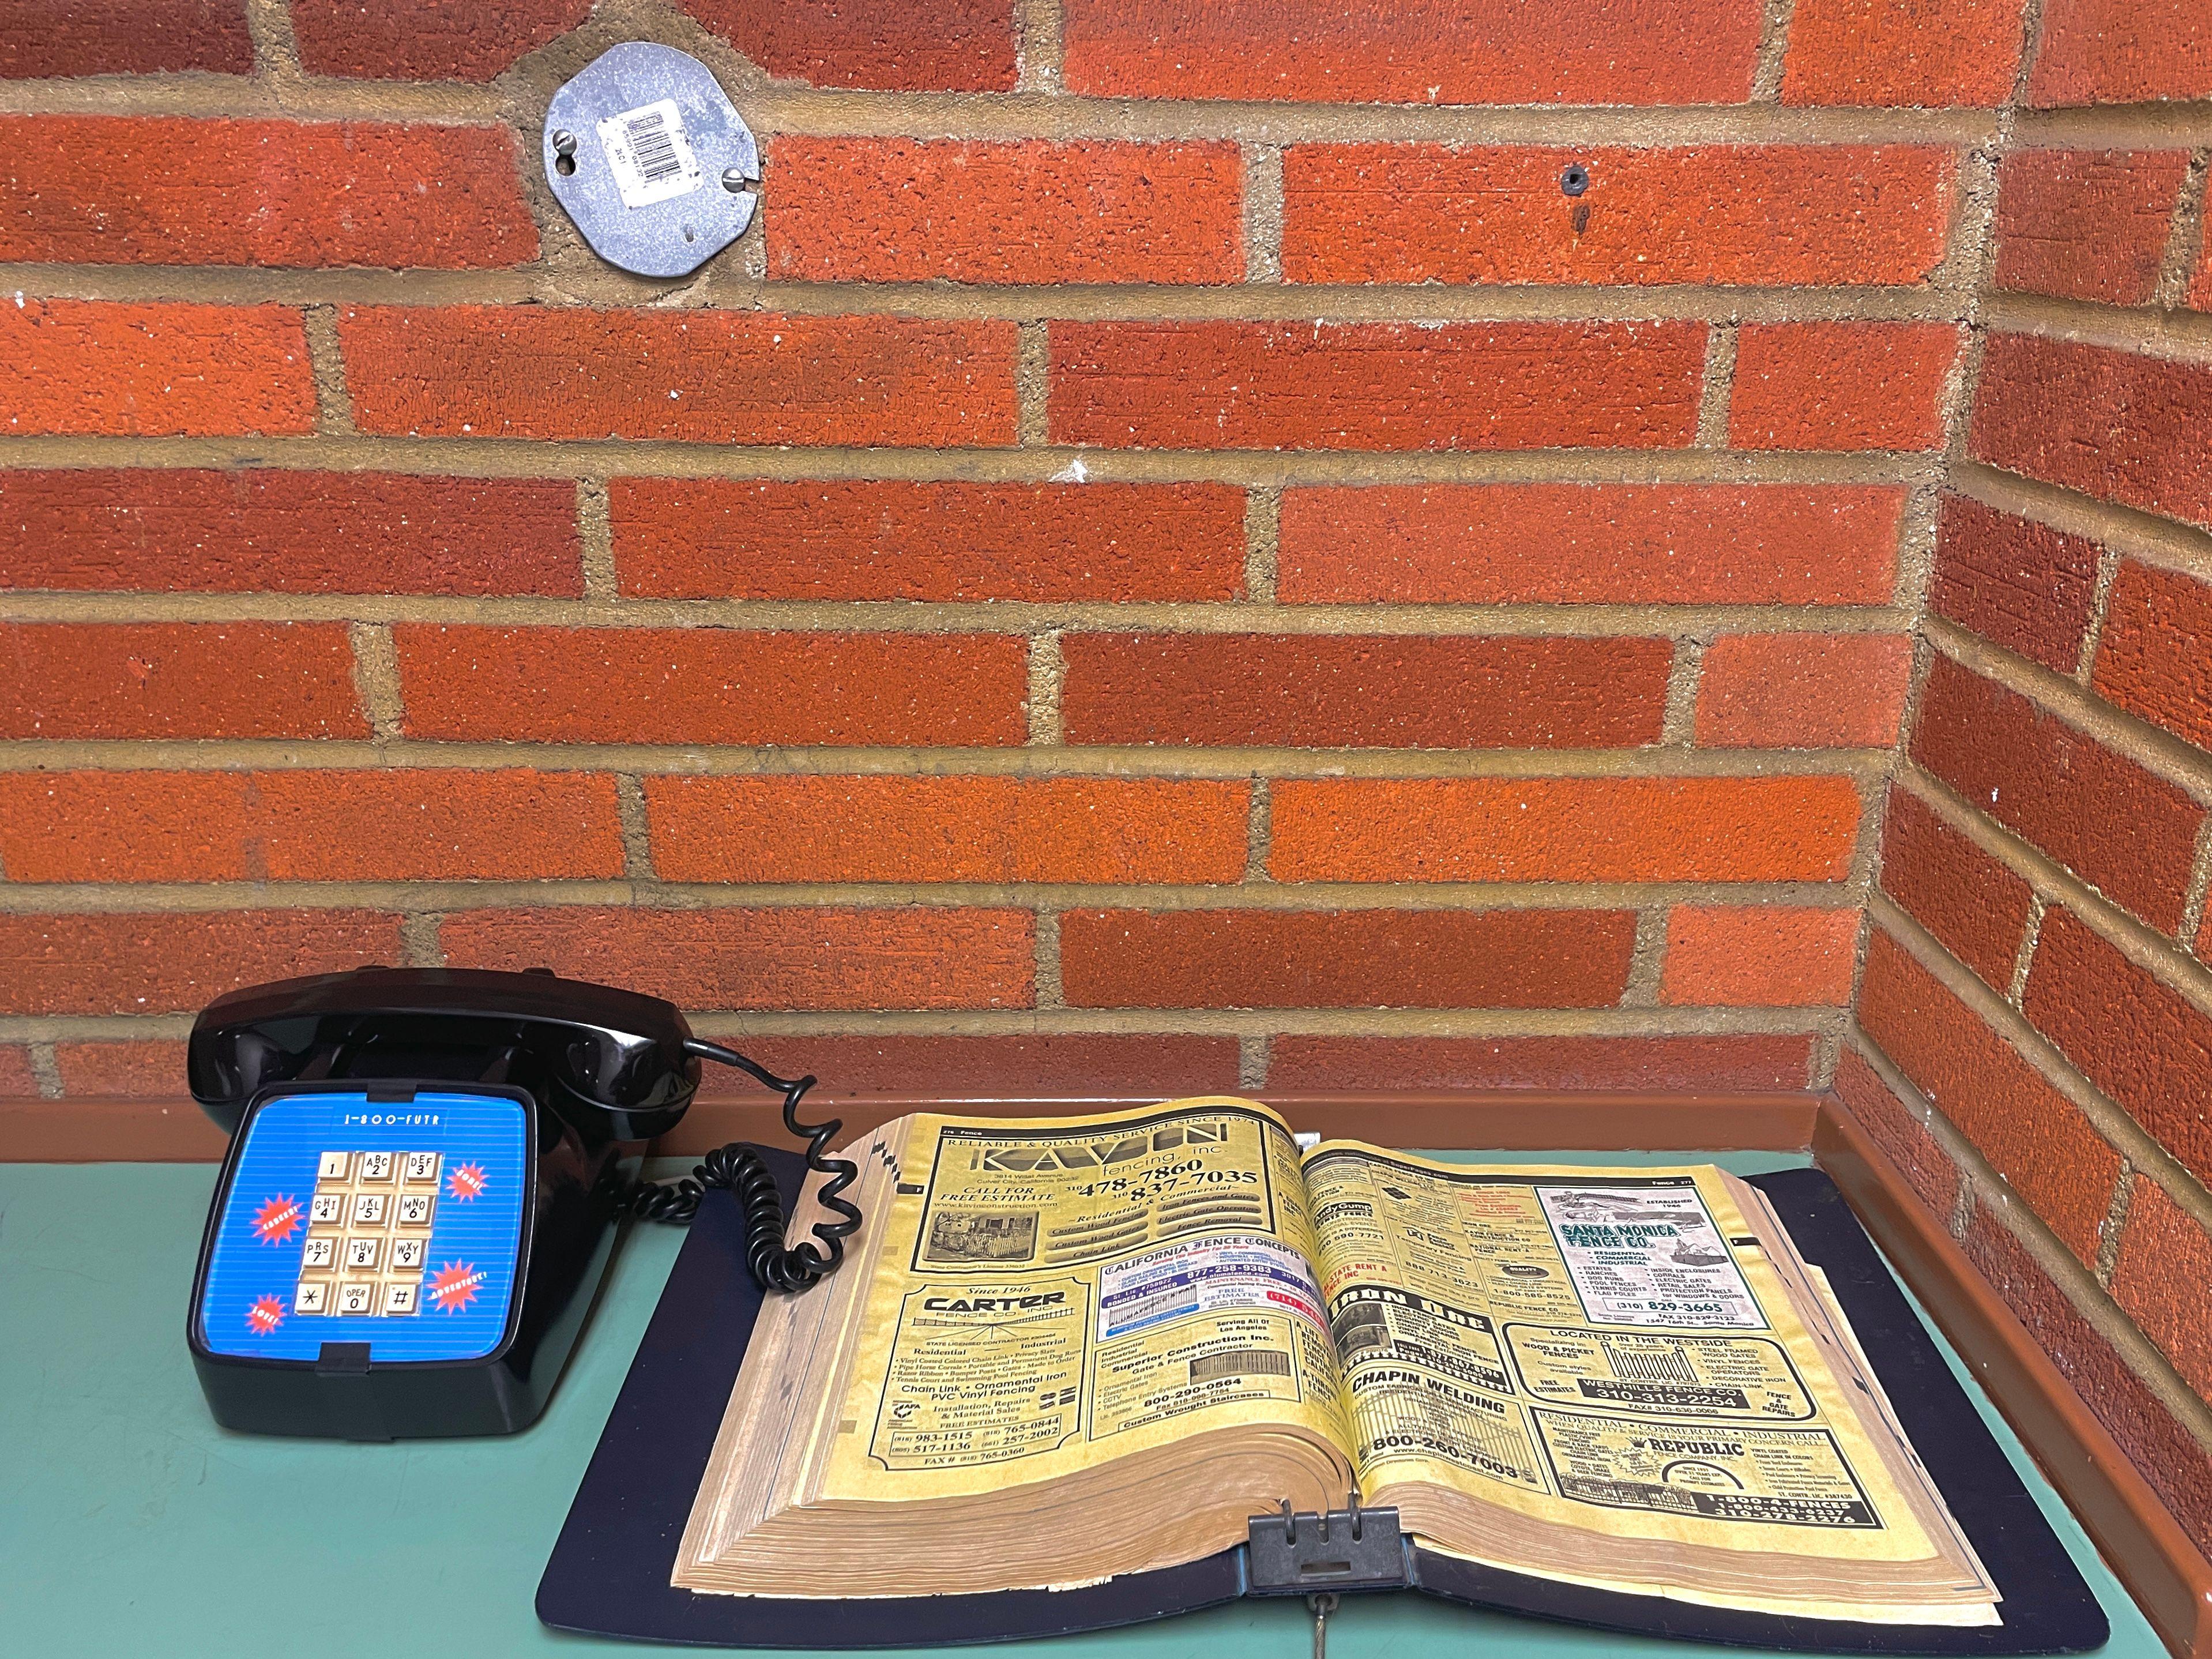 An old touchtone phone next to a brick wall with an old yellow pages phonebook next to it. The phone tells the future.